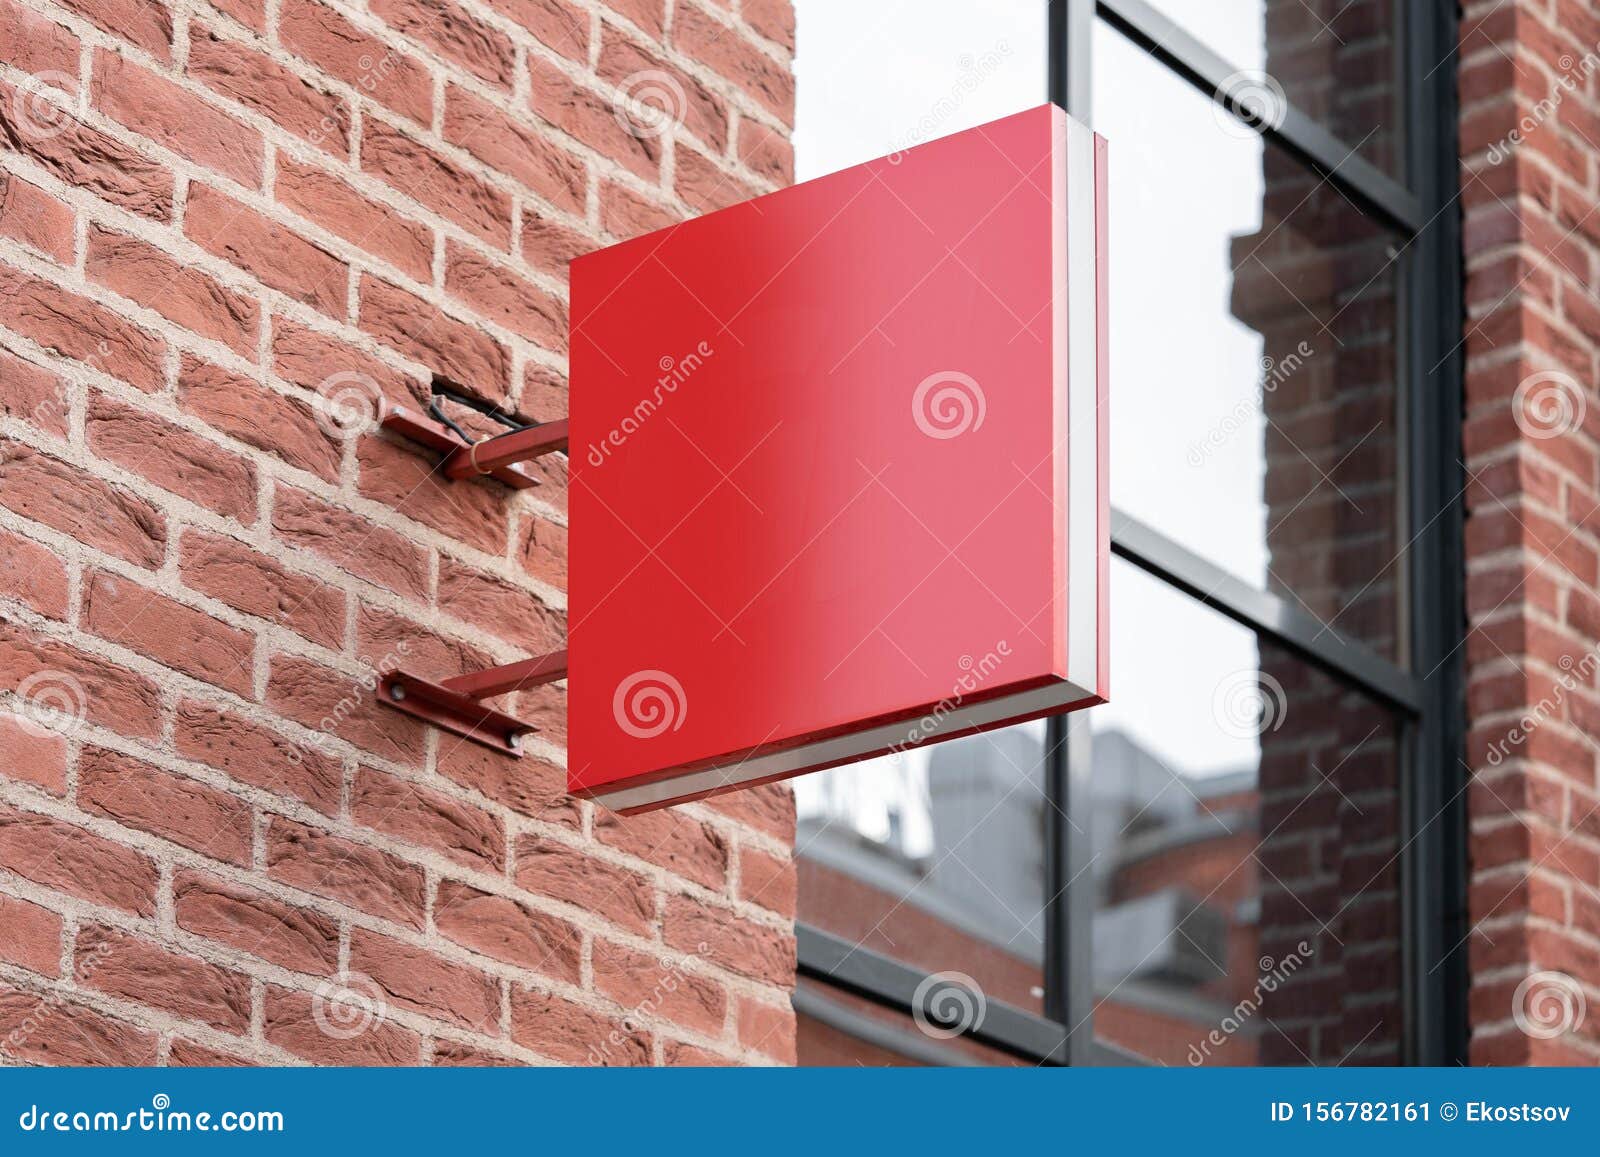 Download Blank Red Square Store Signboard Mockup Empty Shop Street Sign Signage On The Wall 3d Rendering Stock Illustration Illustration Of Hanging Entrance 156782161